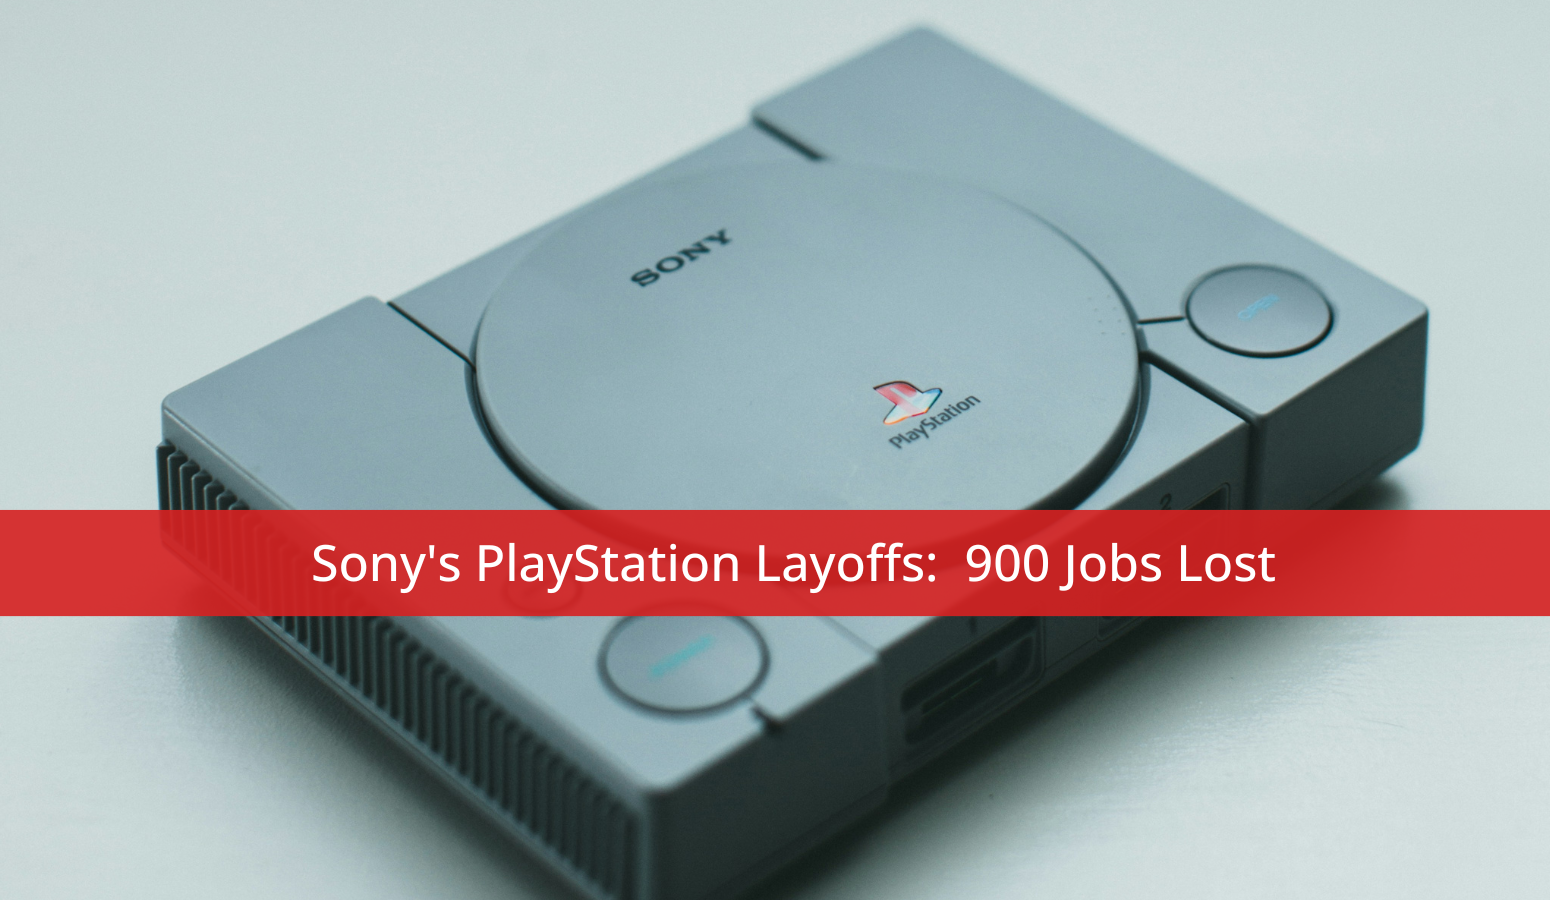 Sony to cut about 900 jobs in its PlayStation unit as layoffs in  technology, gaming sector continue